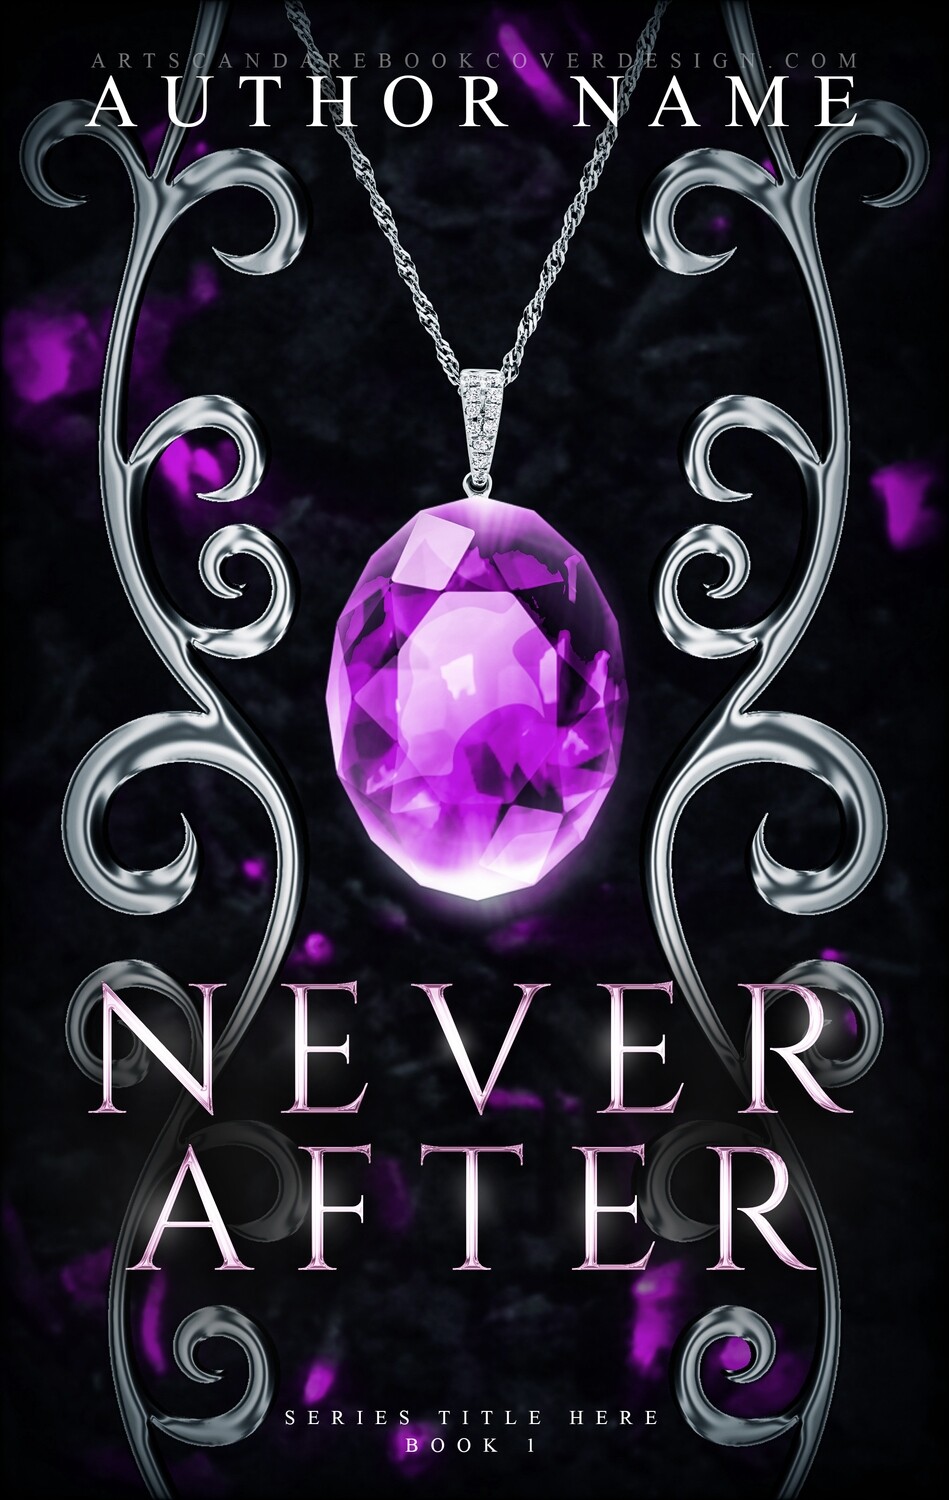 NEVER AFTER